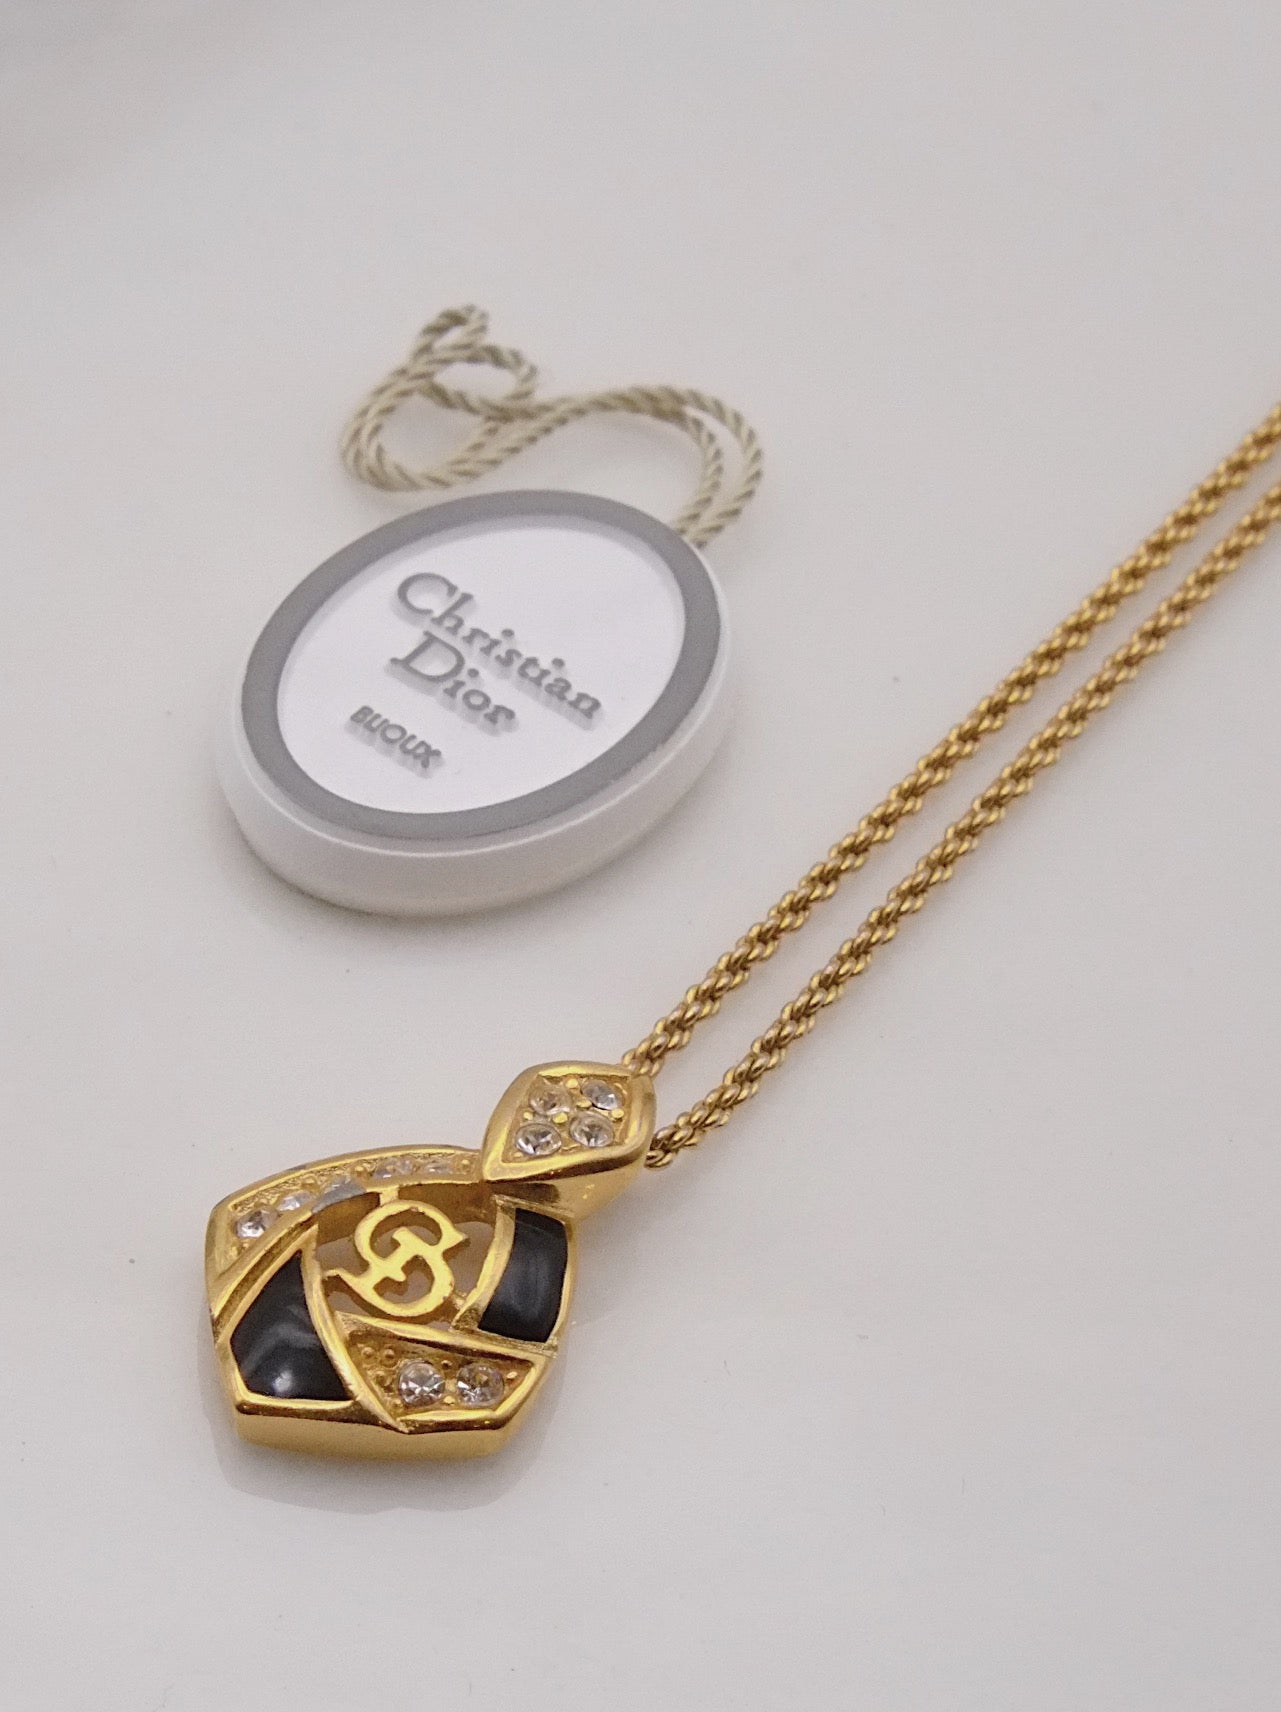 Christian Dior Gold CD Vintage Repurposed Dainty Charm Necklace   sororité